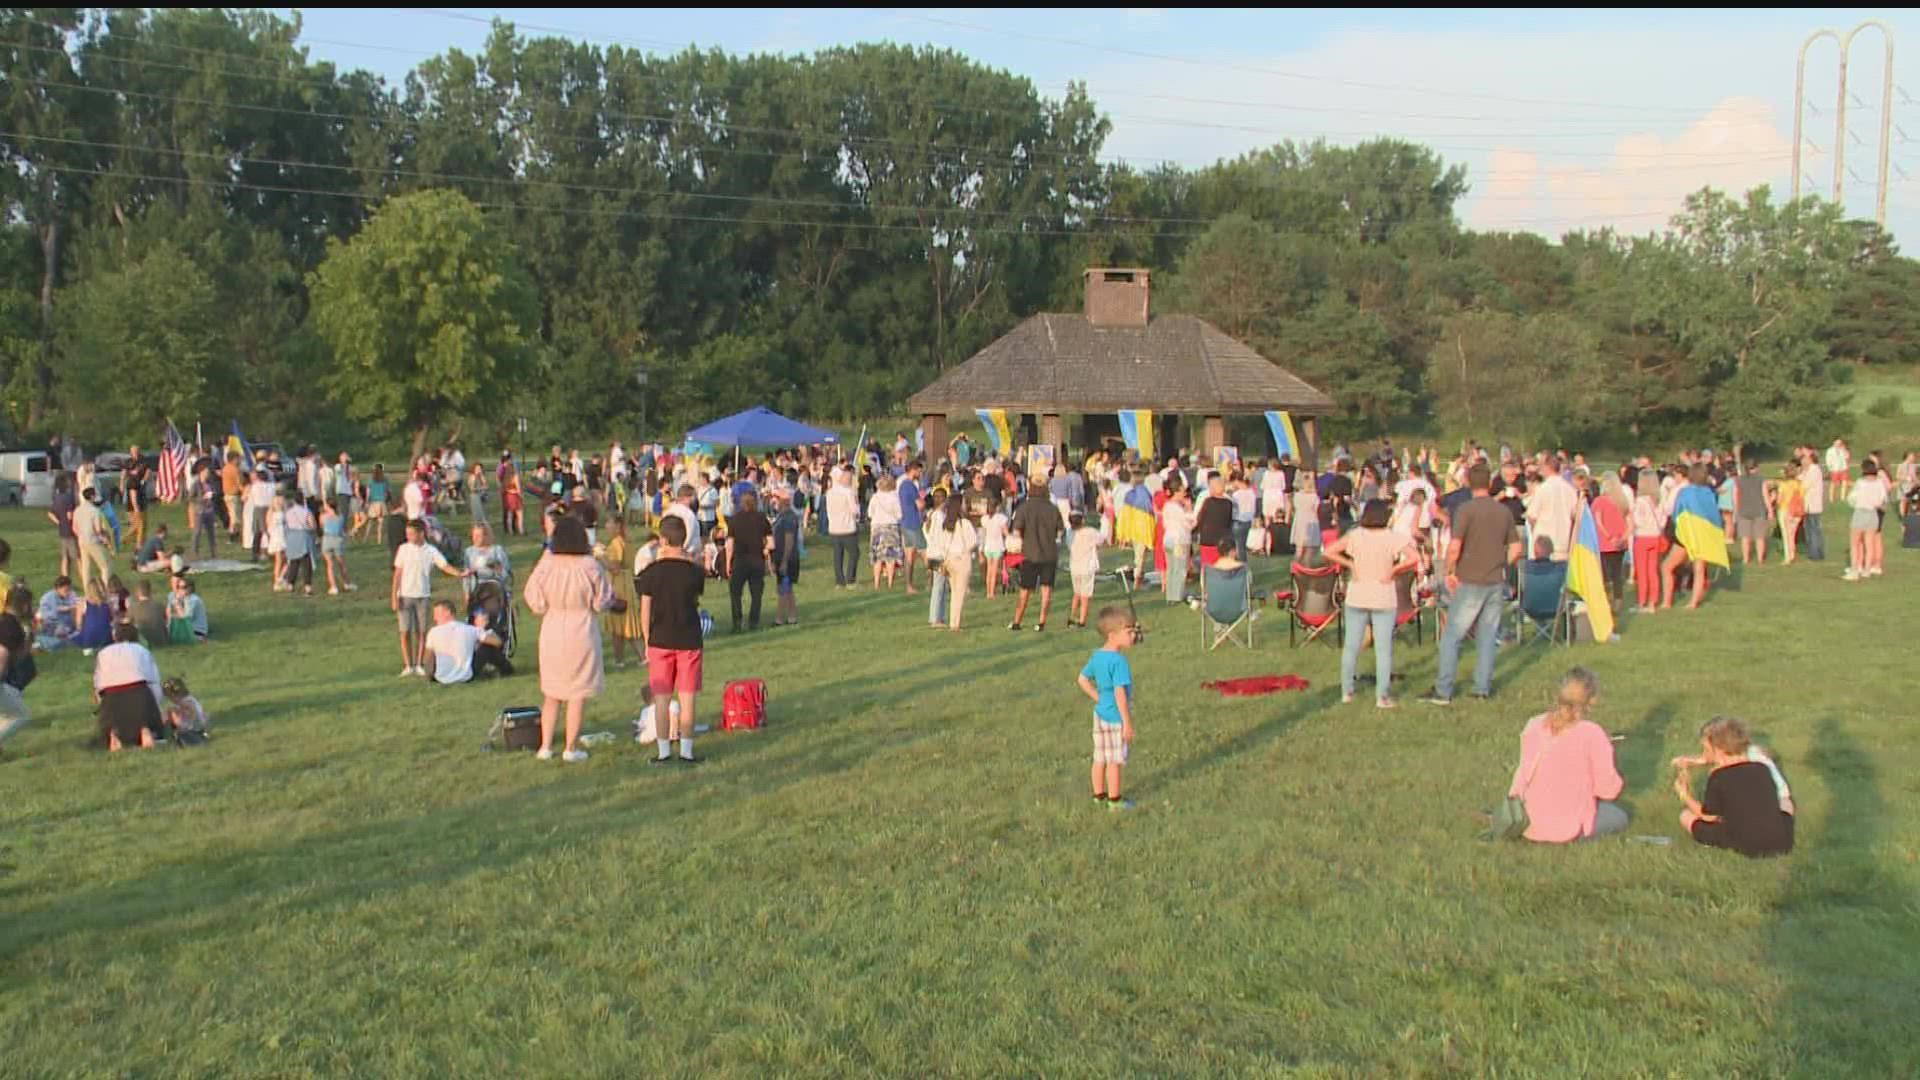 The local Ukrainian community gathered at Boom Island Park to celebrate their culture with food, music and dancing.